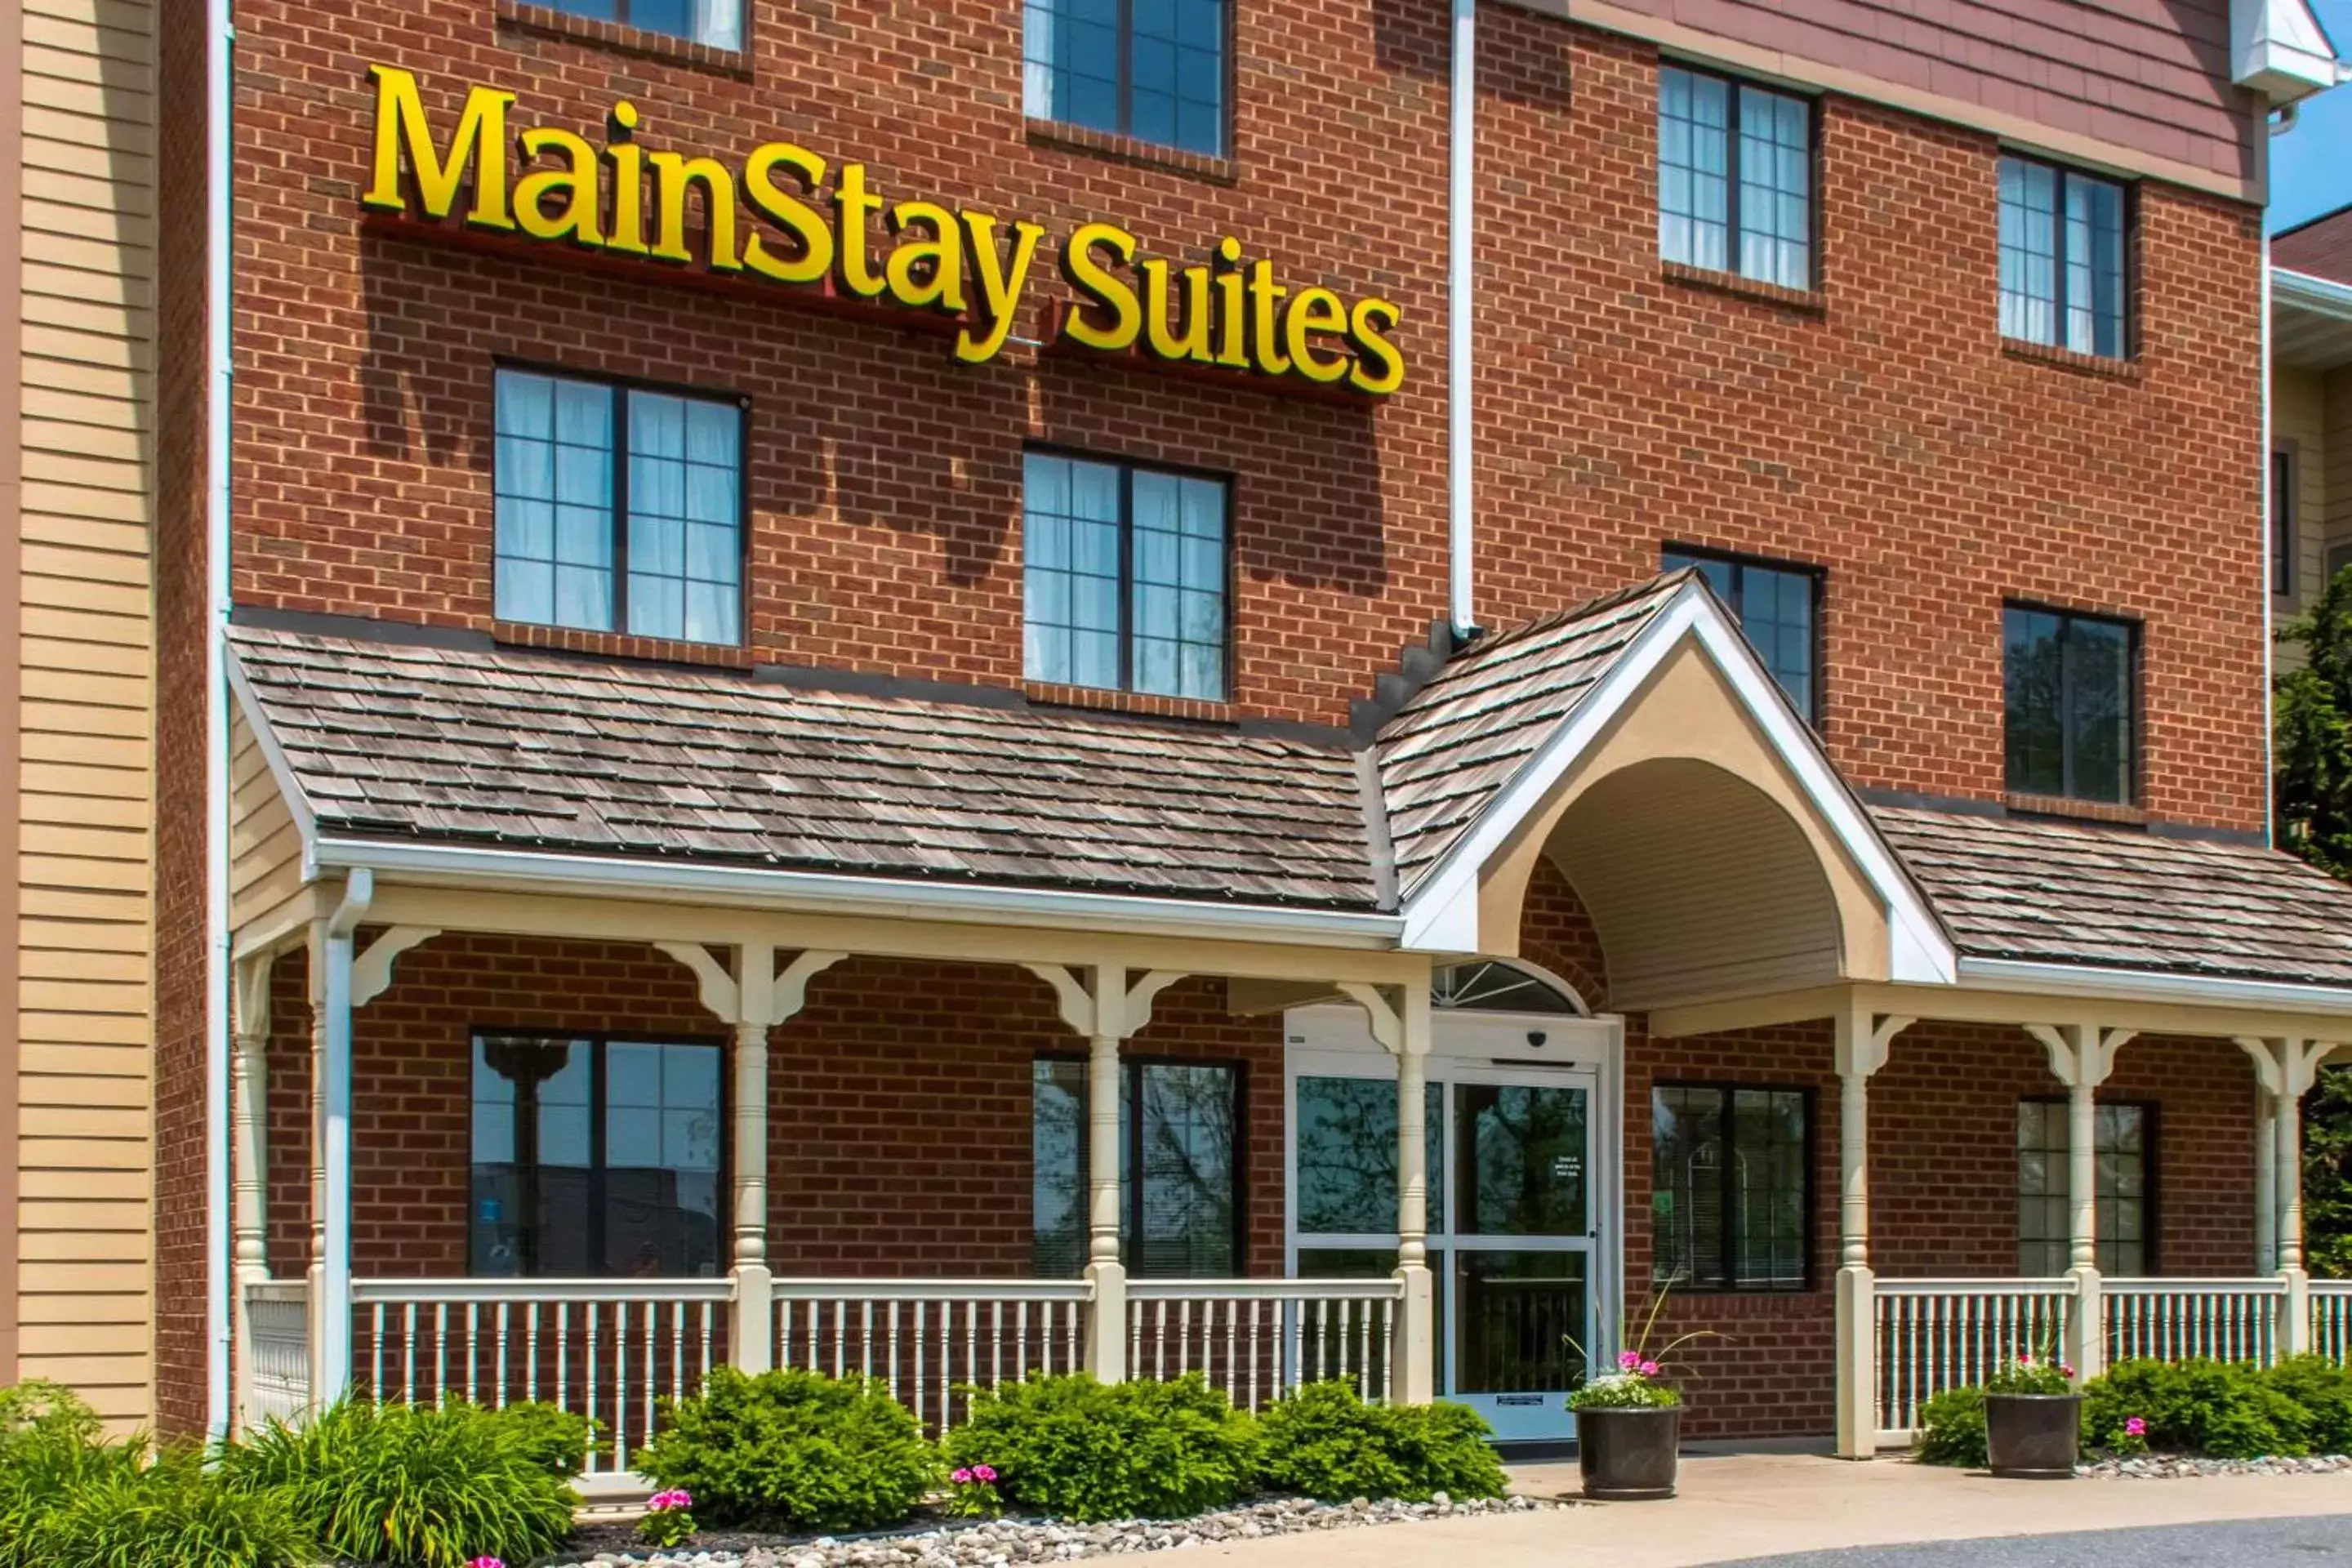 Property Building in MainStay Suites of Lancaster County